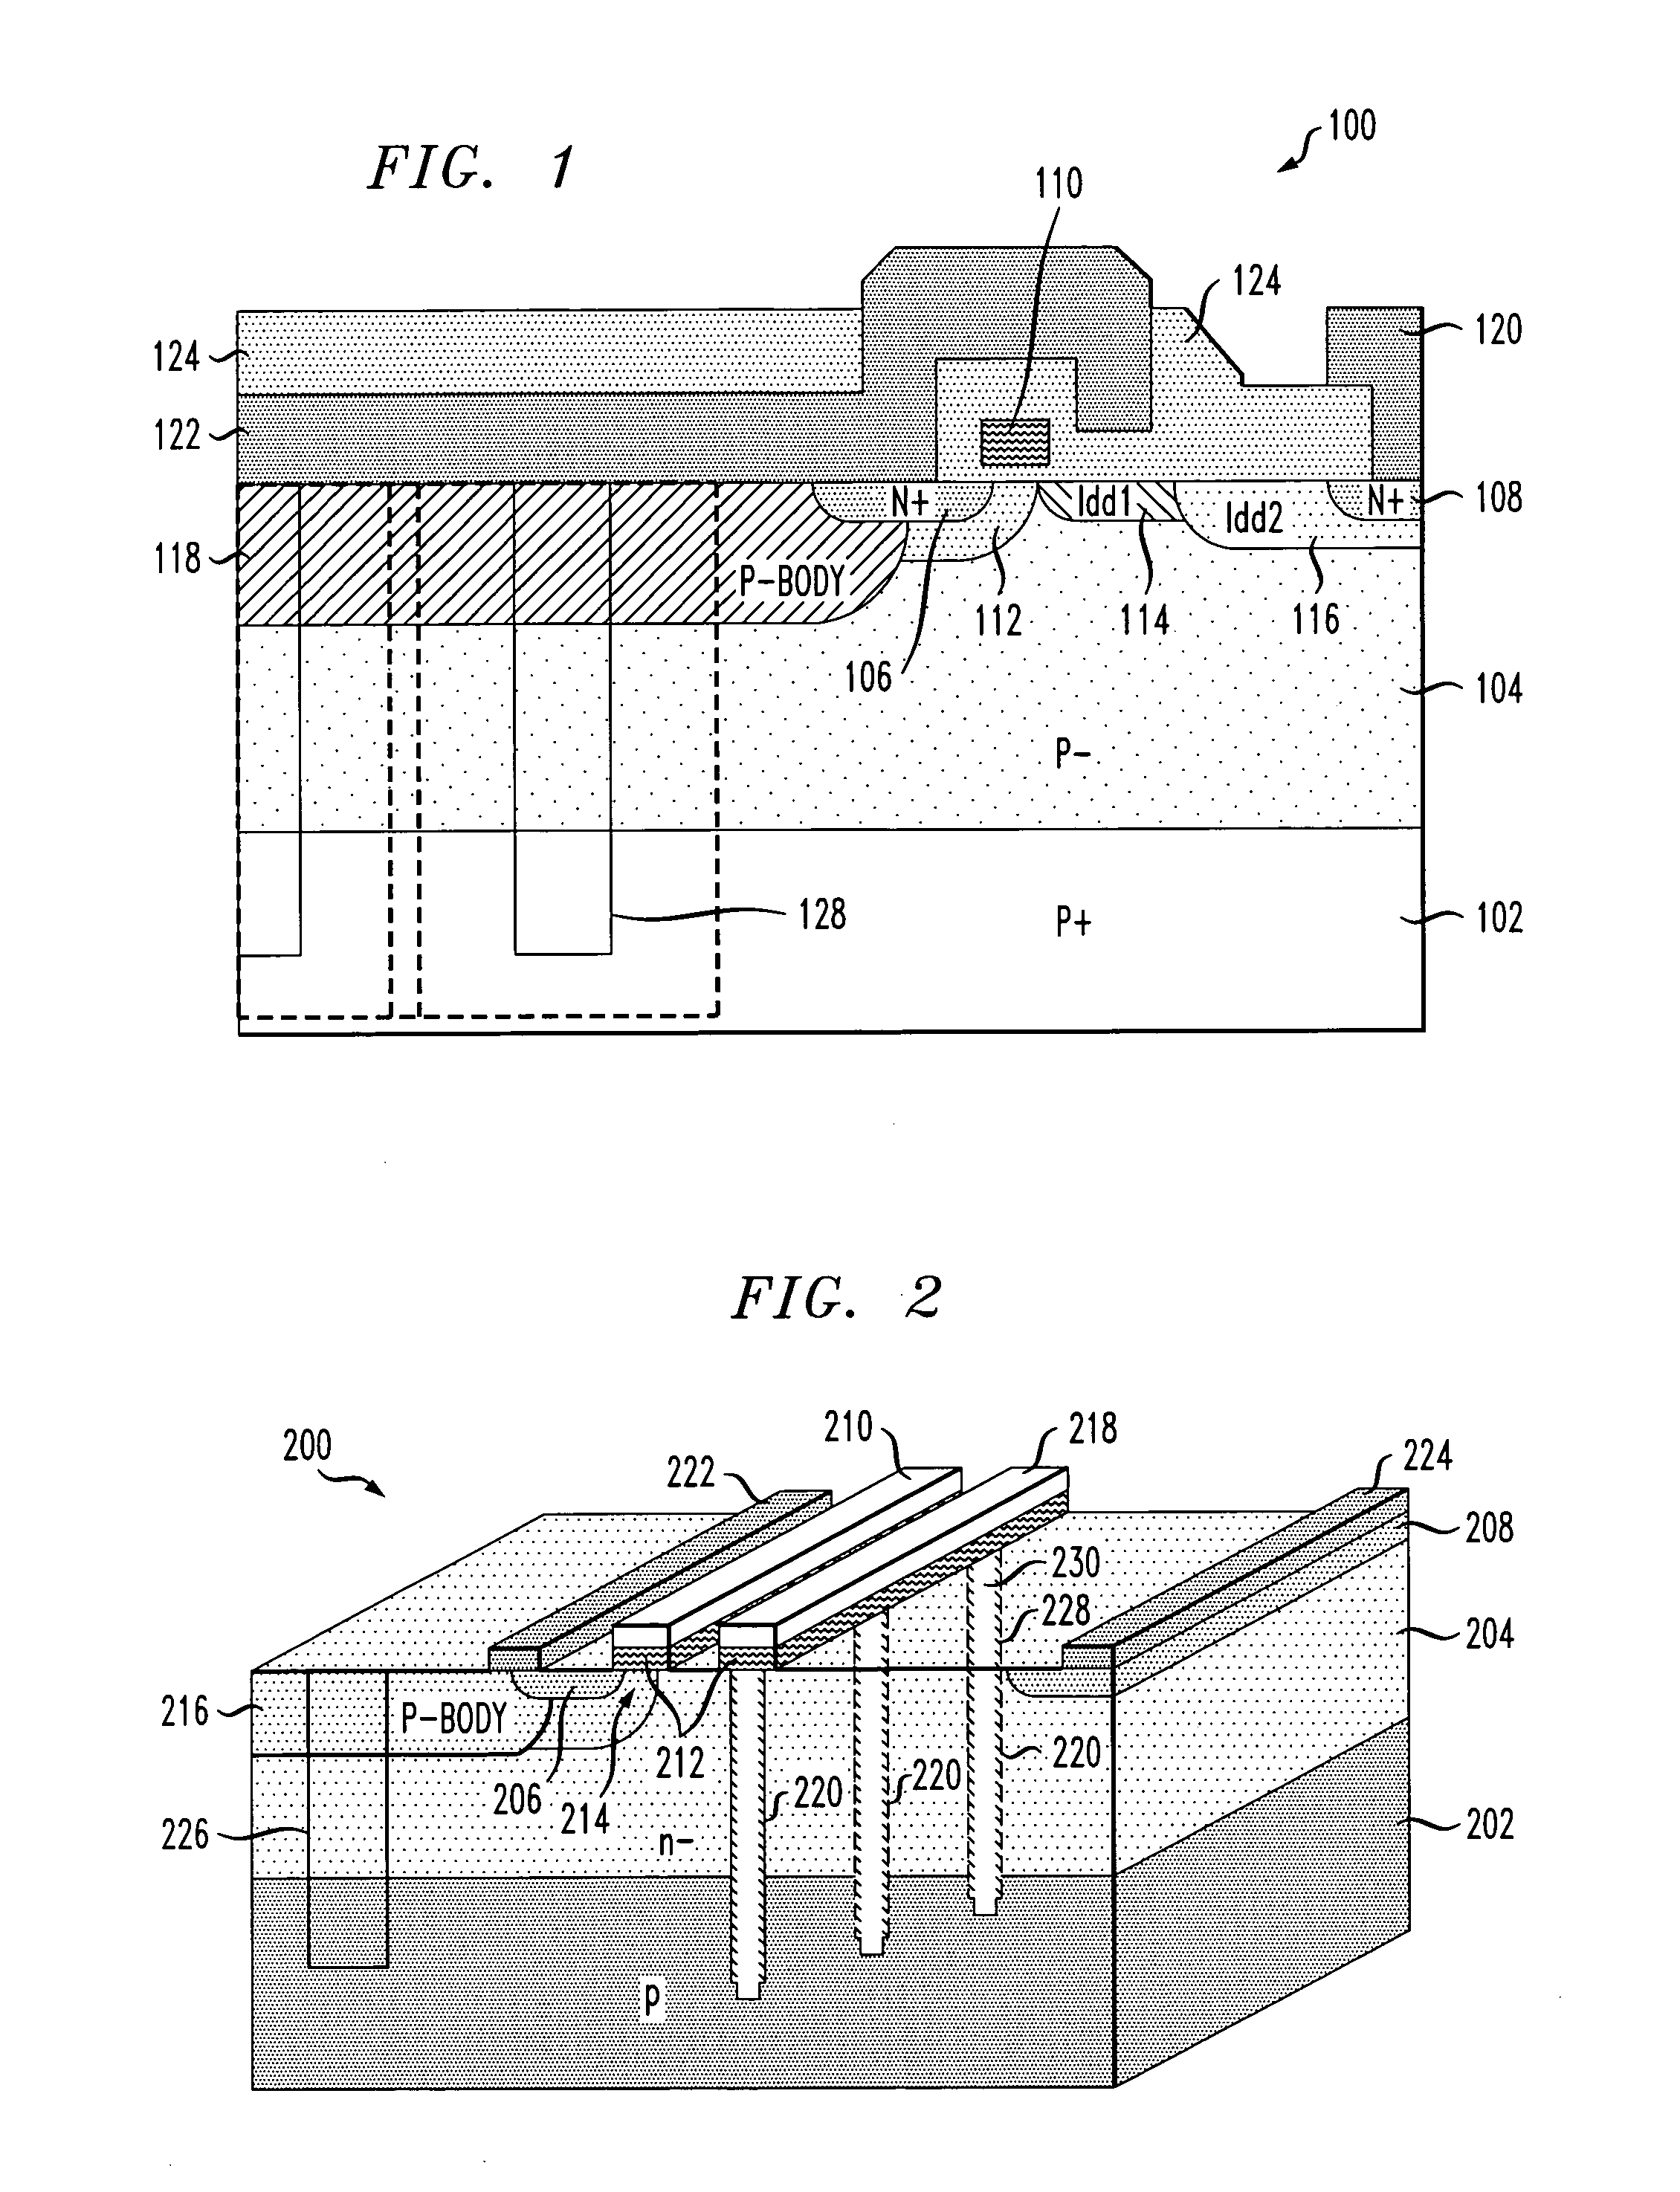 Metal-oxide-semiconductor device having improved performance and reliability